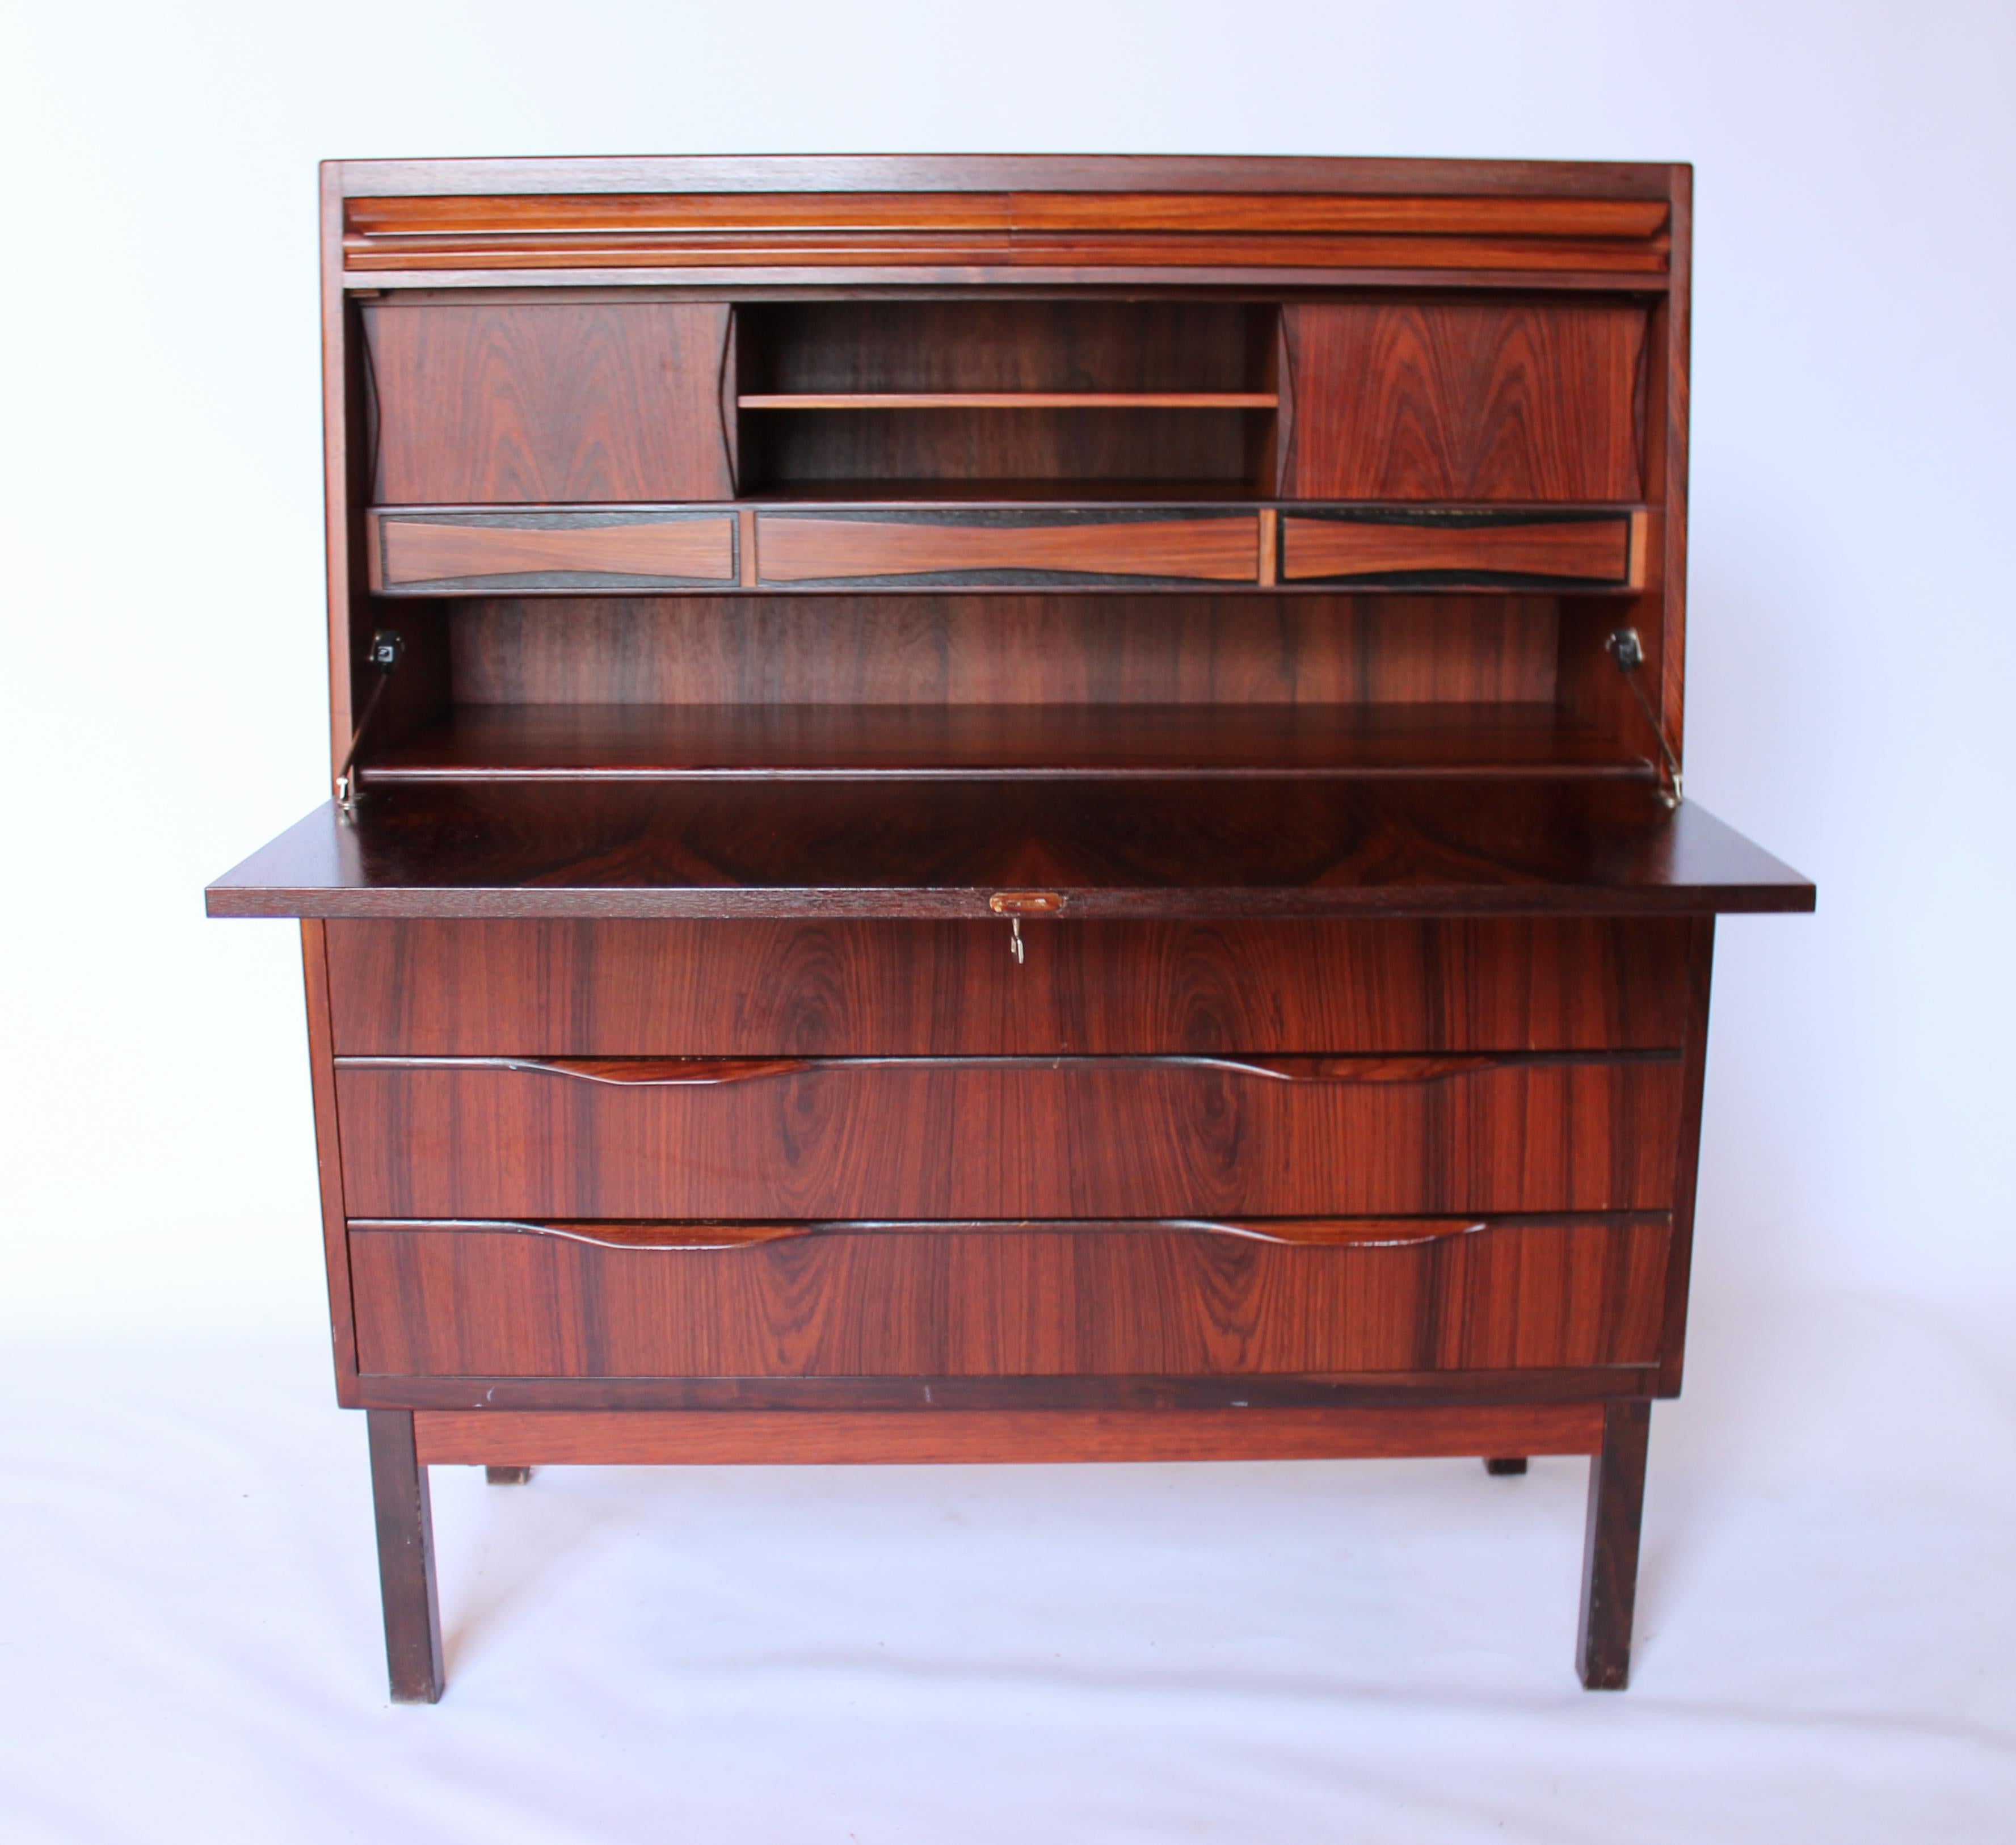 Chest in rosewood designed by Erling Torvits and manufactured by Klim furniture factory in the 1960s. The chest is in great vintage condition.